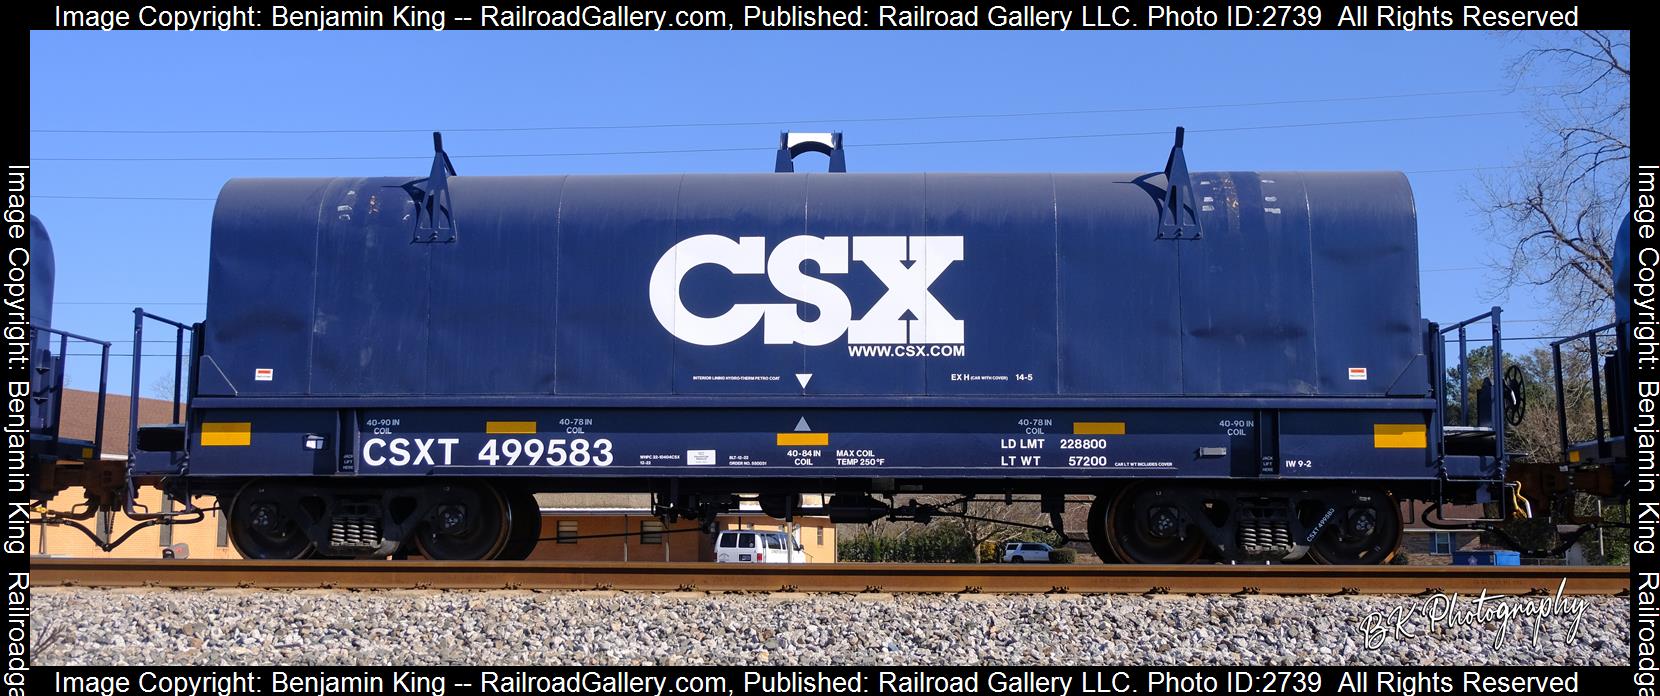 CSXT 499583 is a class Freightcar America Coil Car and  is pictured in Jamestown, Georgia, USA.  This was taken along the CSXT Fitzgerald Subdivision on the CSX Transportation. Photo Copyright: Benjamin King uploaded to Railroad Gallery on 12/20/2023. This photograph of CSXT 499583 was taken on Monday, January 02, 2023. All Rights Reserved. 